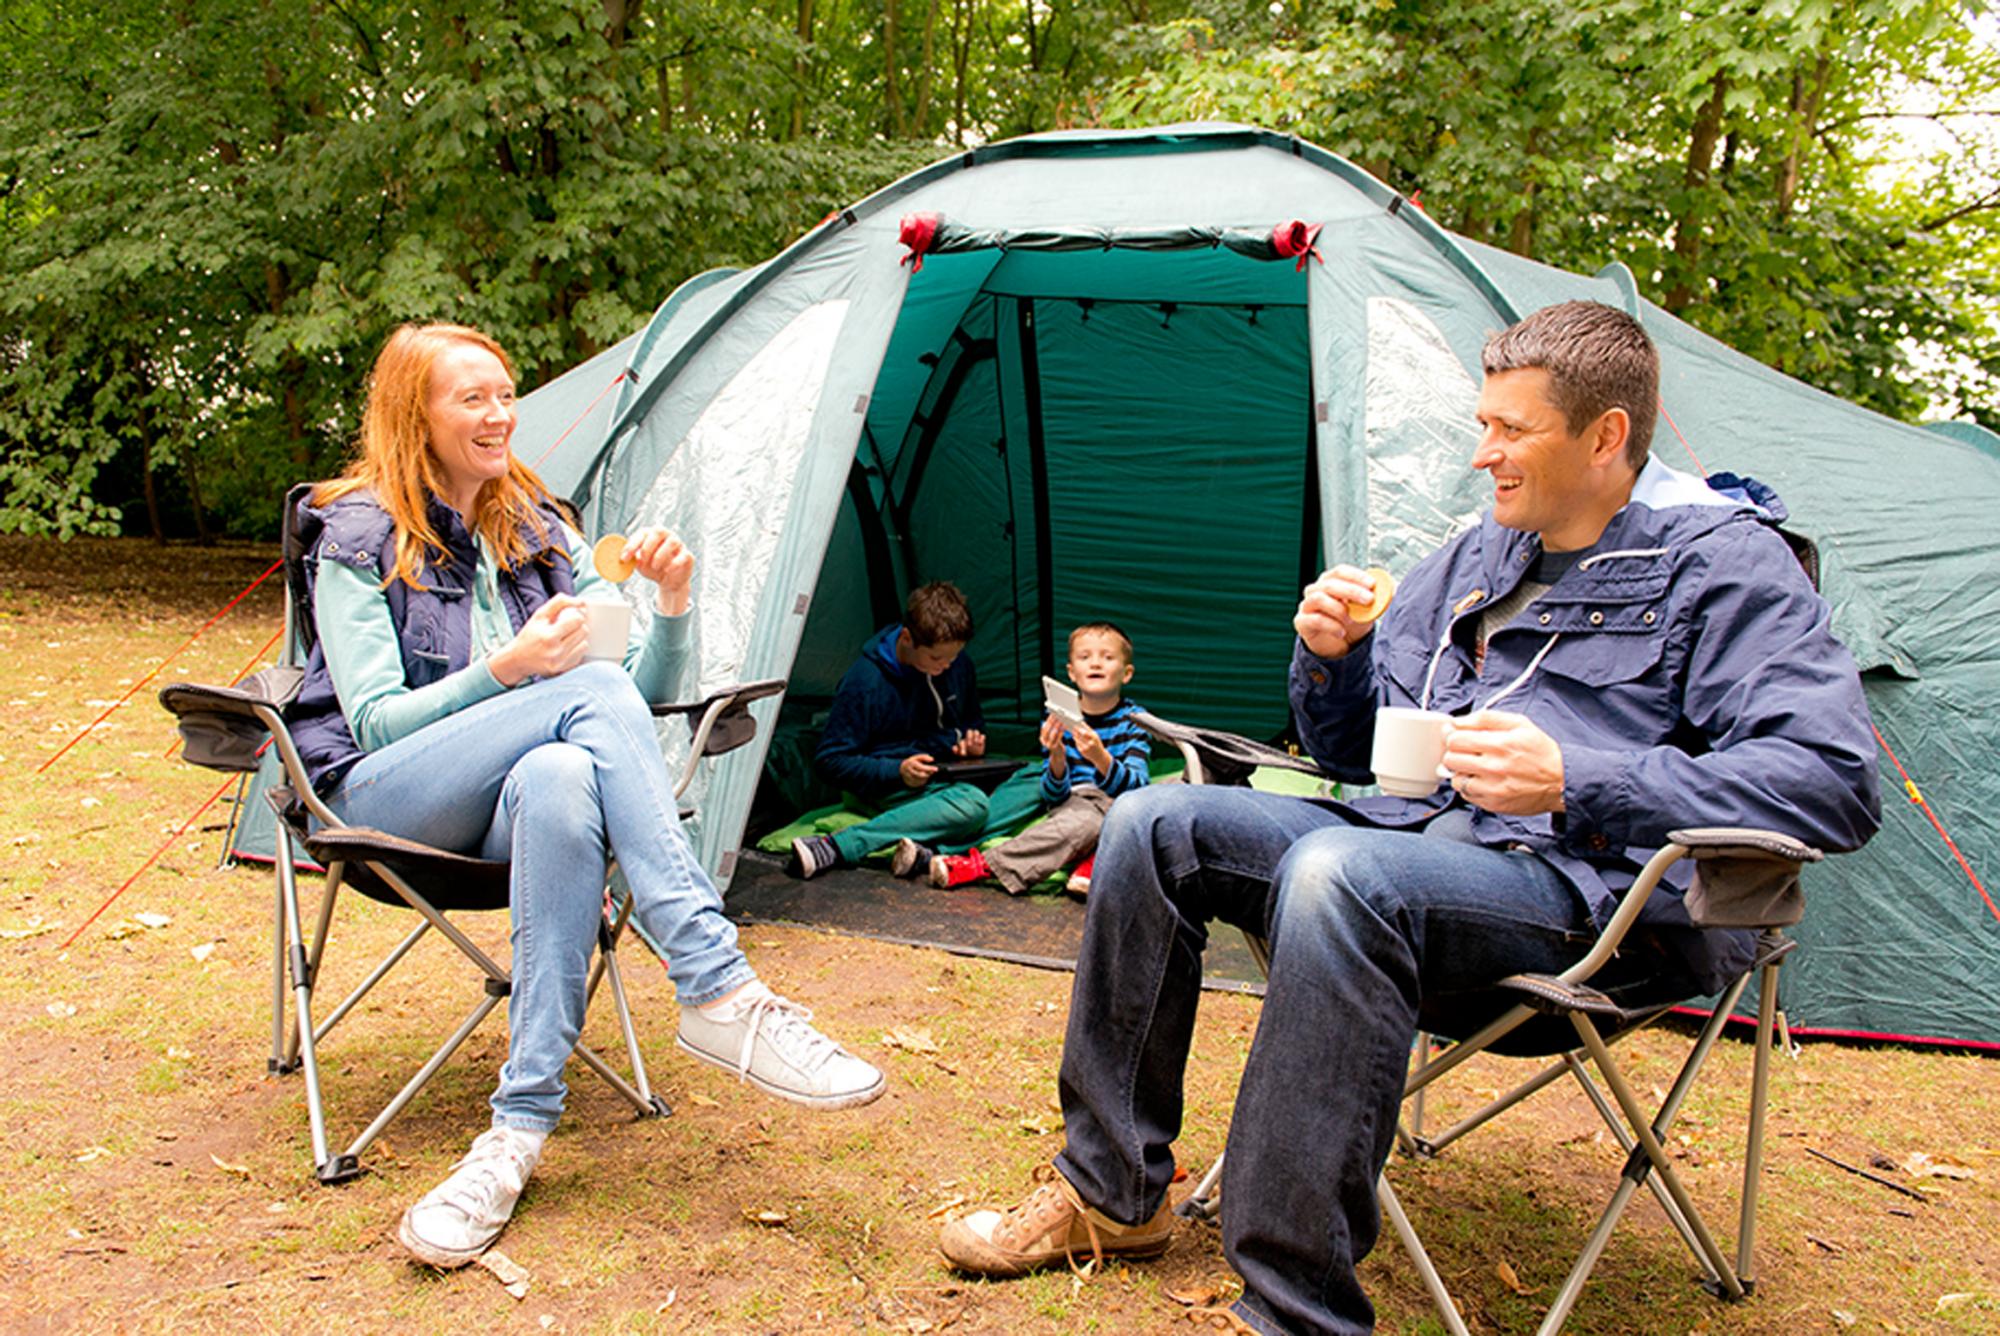 Family camping in tent